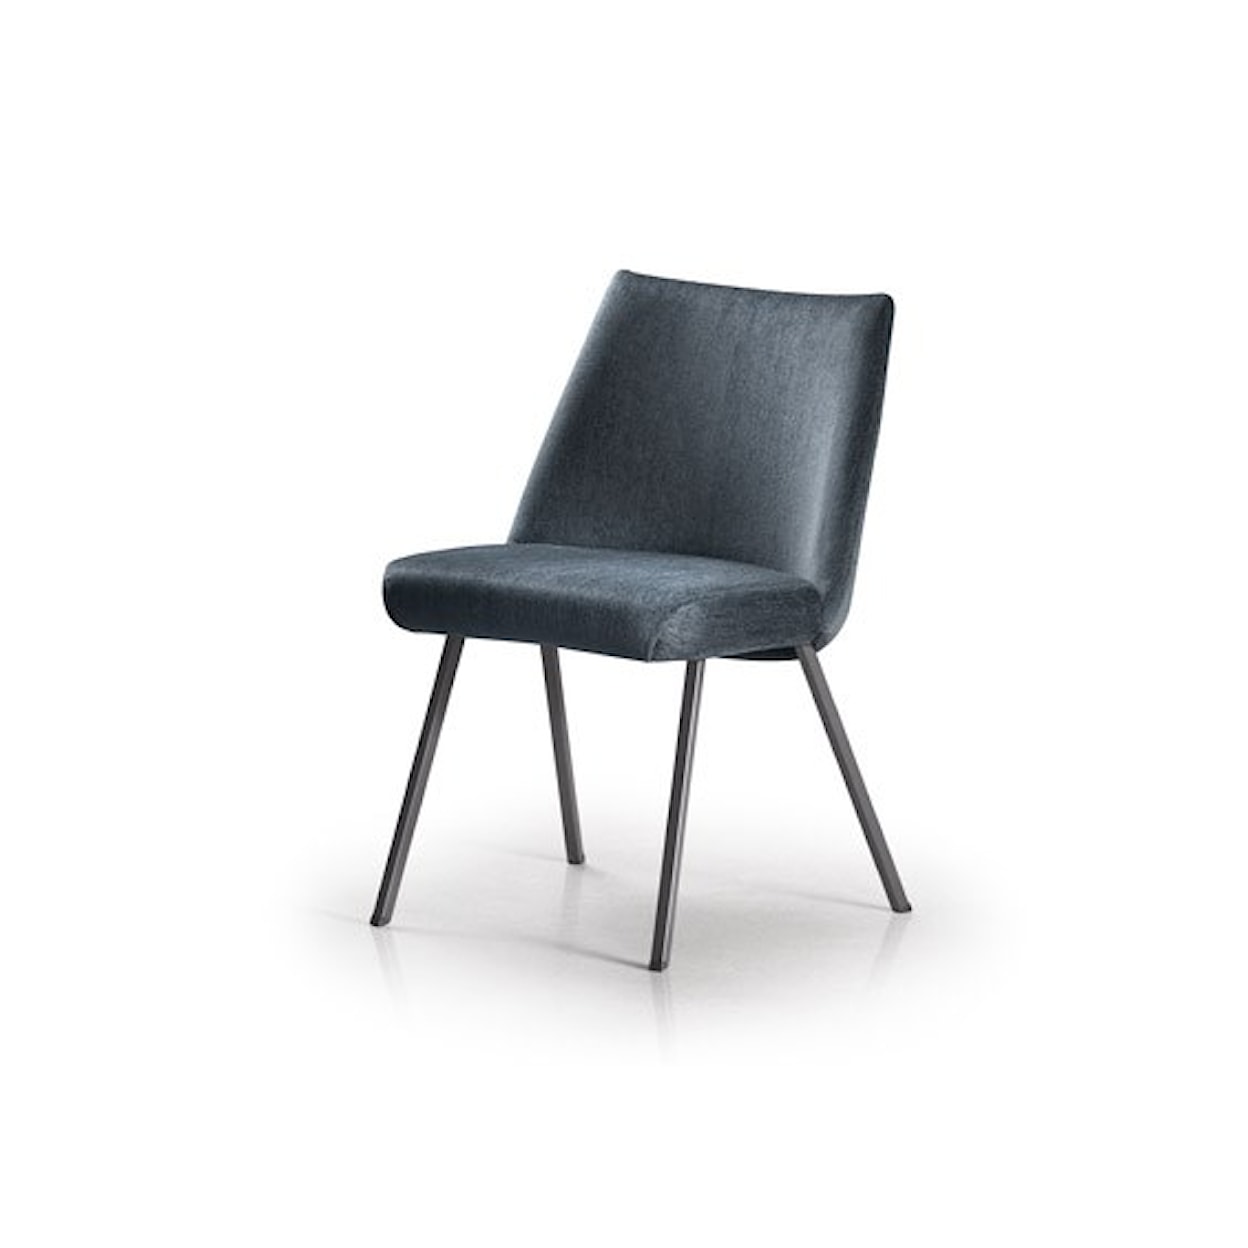 Trica Lola Upholstered Side Chair